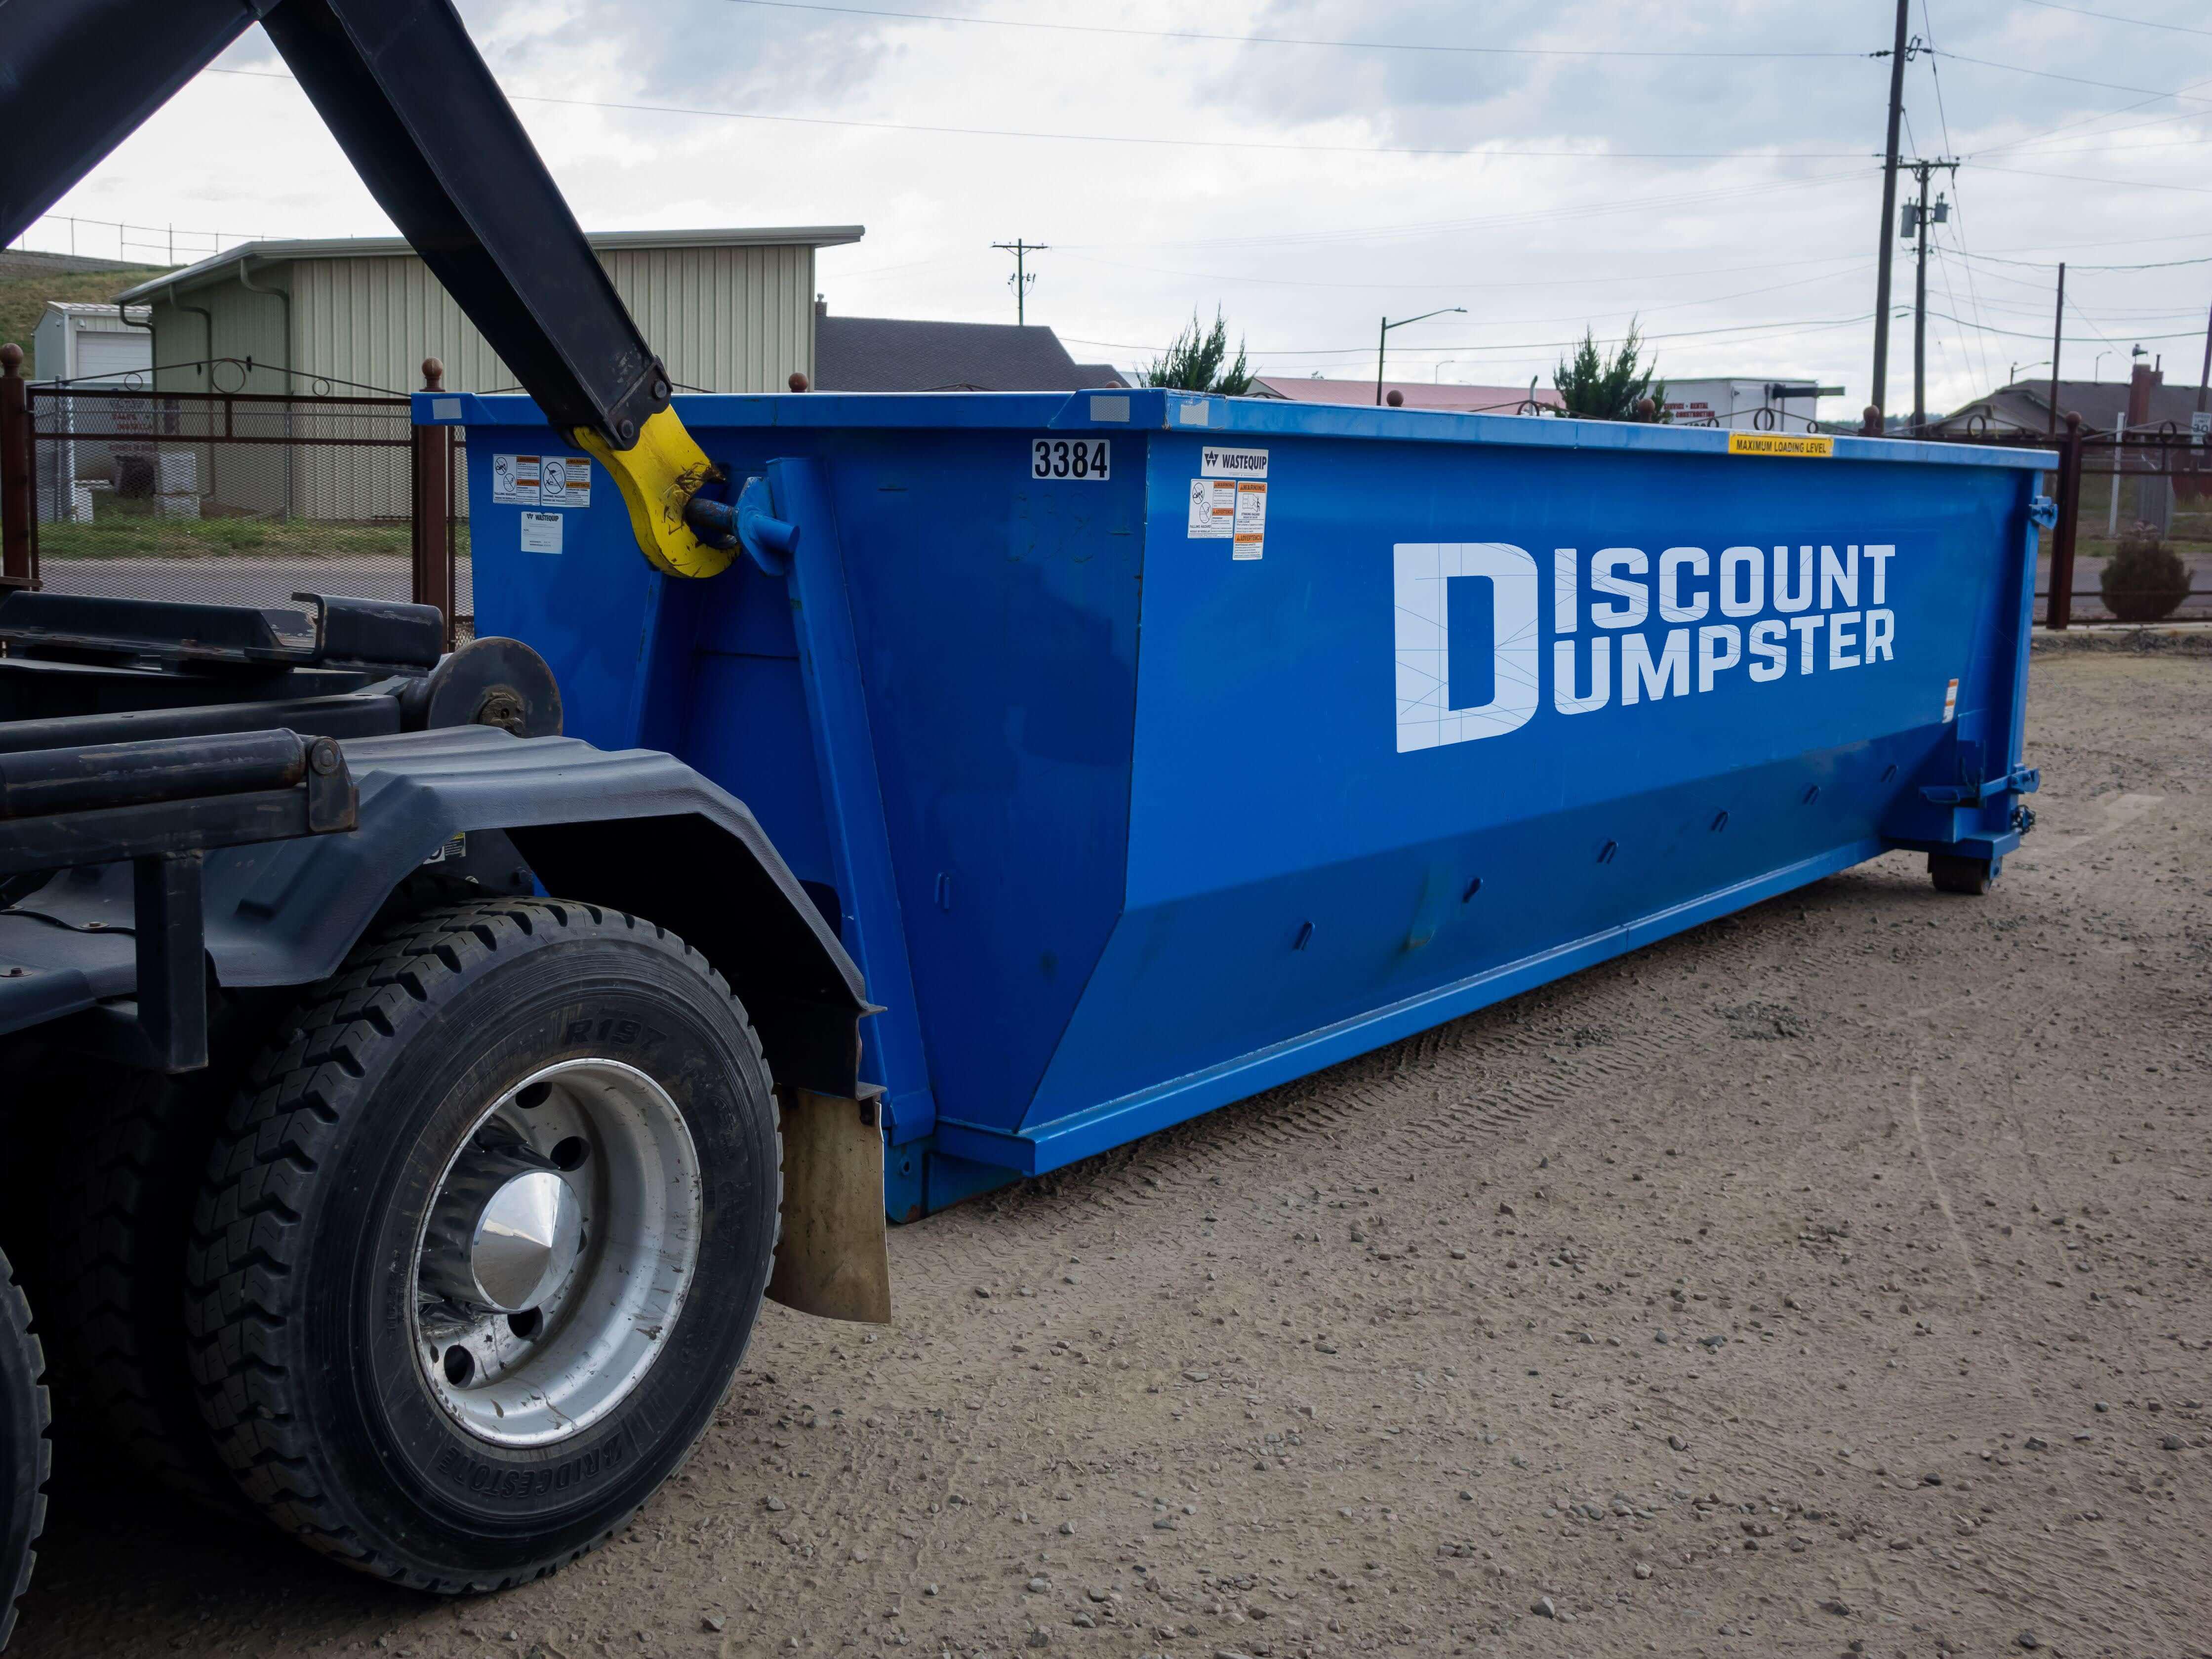 Call today to learn more about our affordable dumpster rates in Denver co